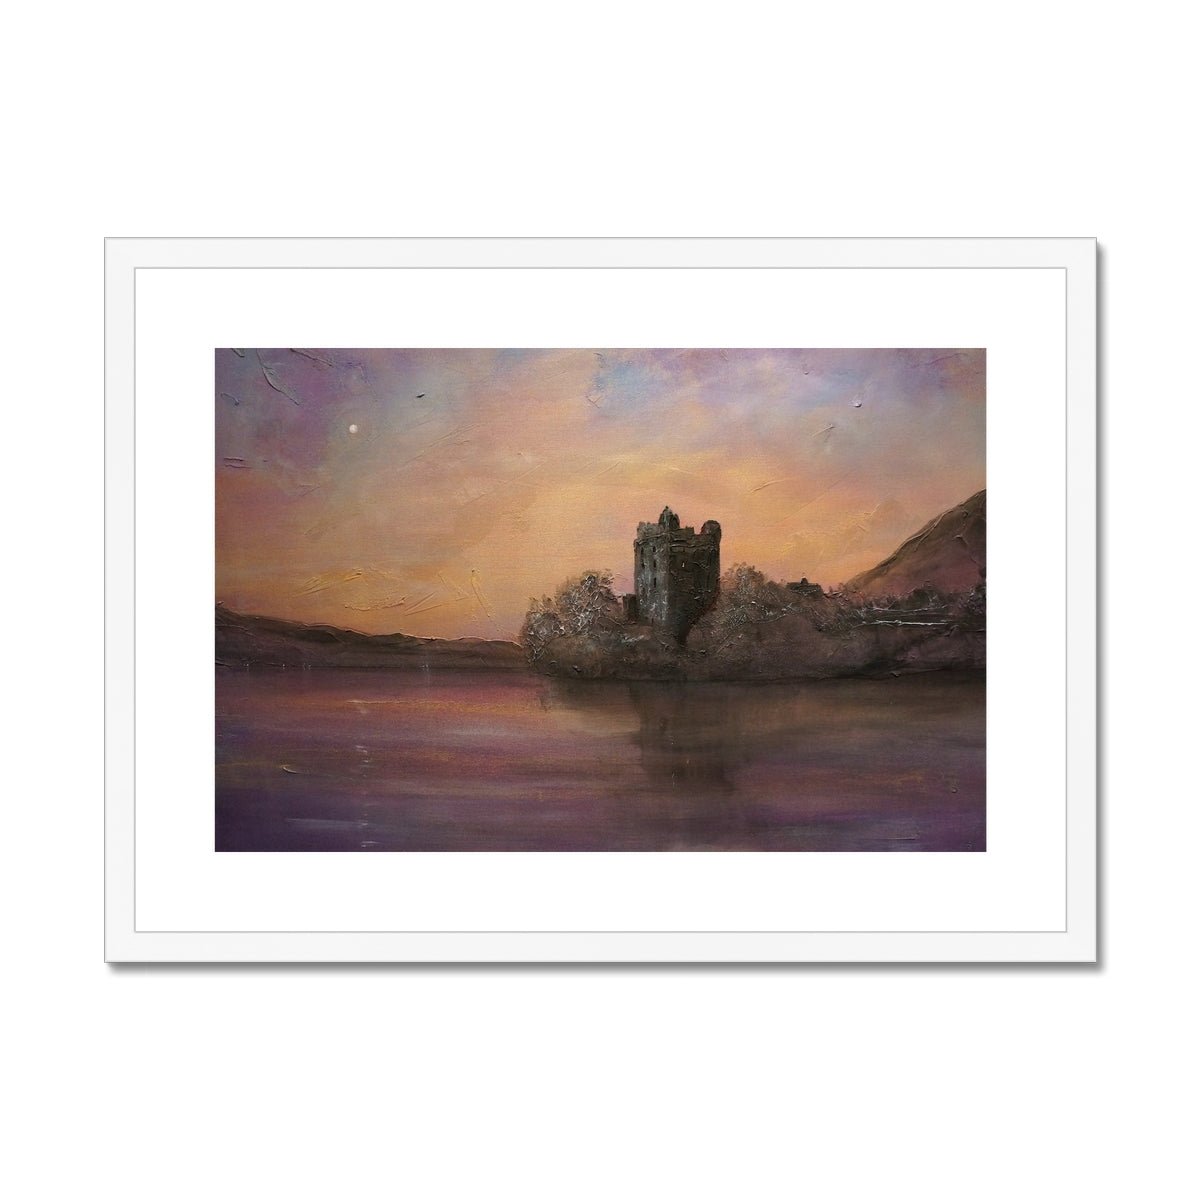 Urquhart Castle Moonlight Painting | Framed & Mounted Prints From Scotland-Framed & Mounted Prints-Historic & Iconic Scotland Art Gallery-A2 Landscape-White Frame-Paintings, Prints, Homeware, Art Gifts From Scotland By Scottish Artist Kevin Hunter